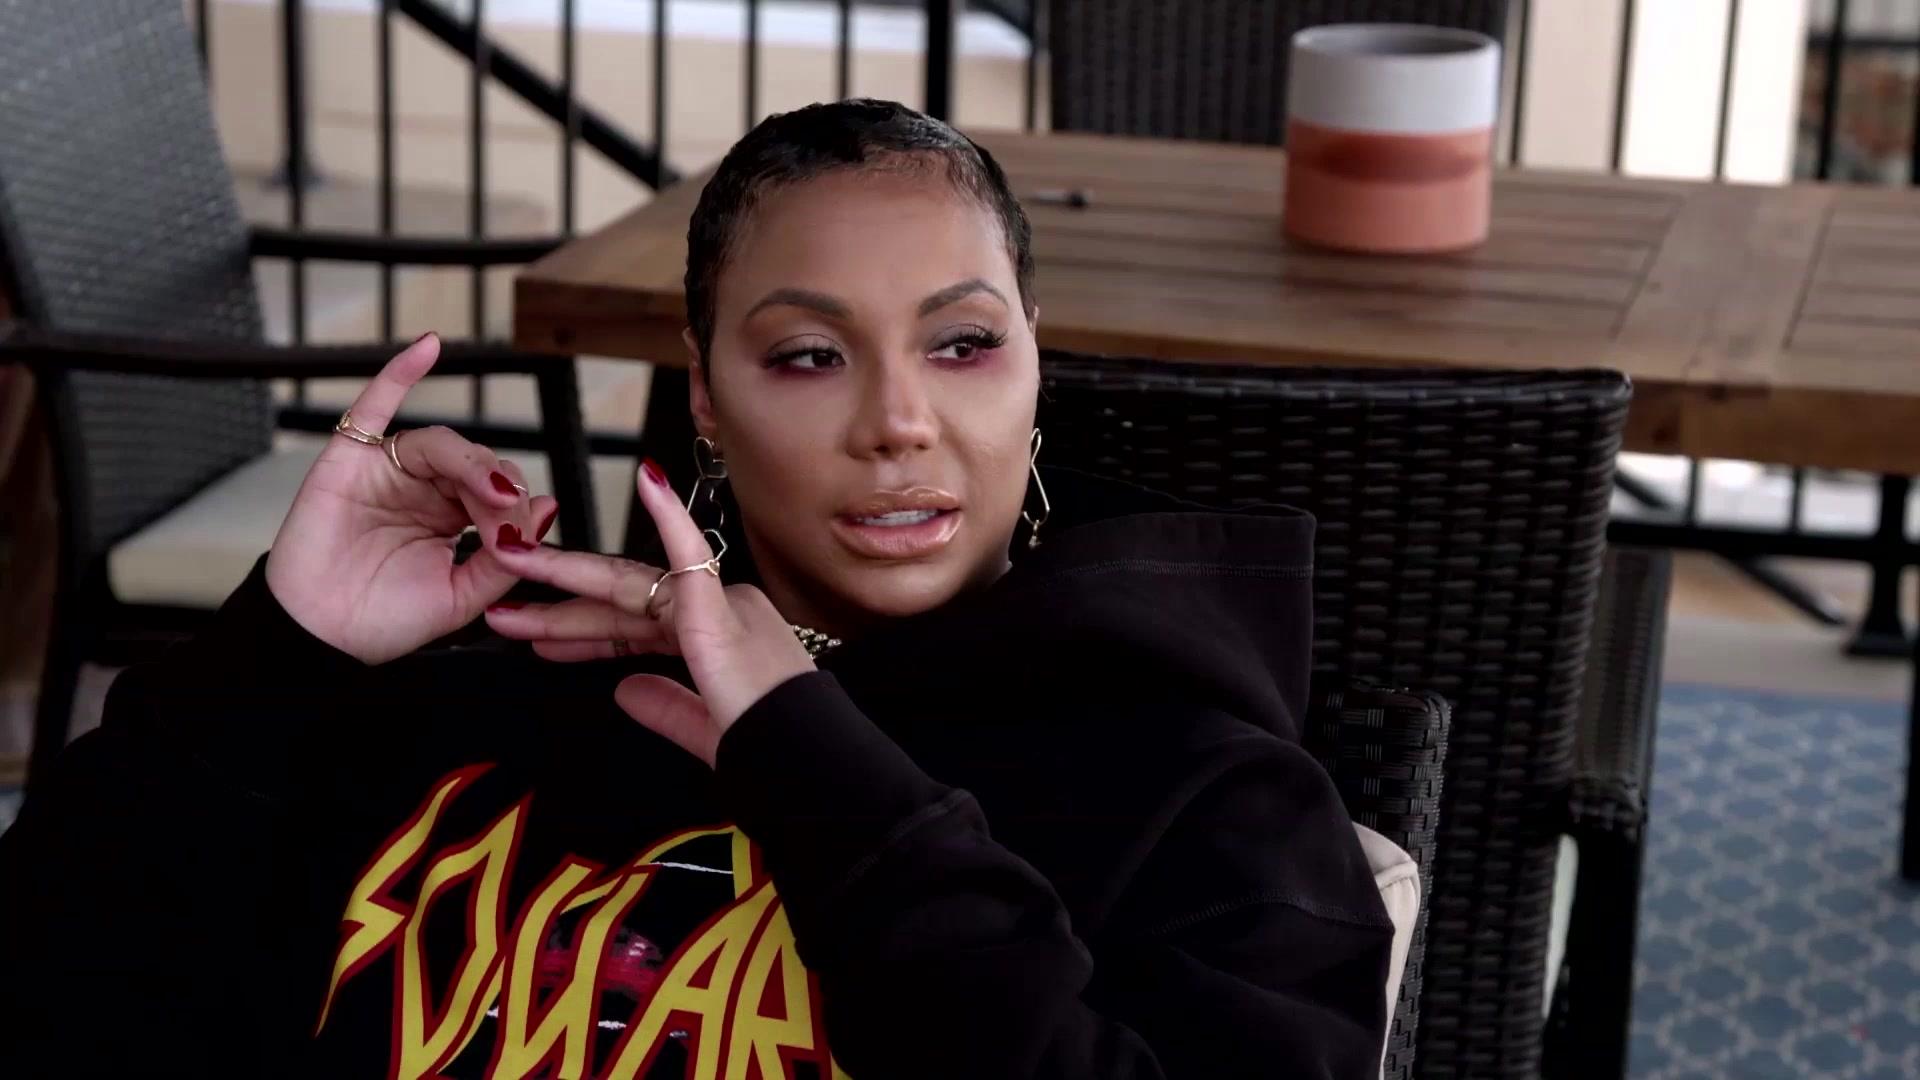 Watch Tamar Completely Loses Her Voice! | Tamar Braxton: Get Ya Life! Video Extras